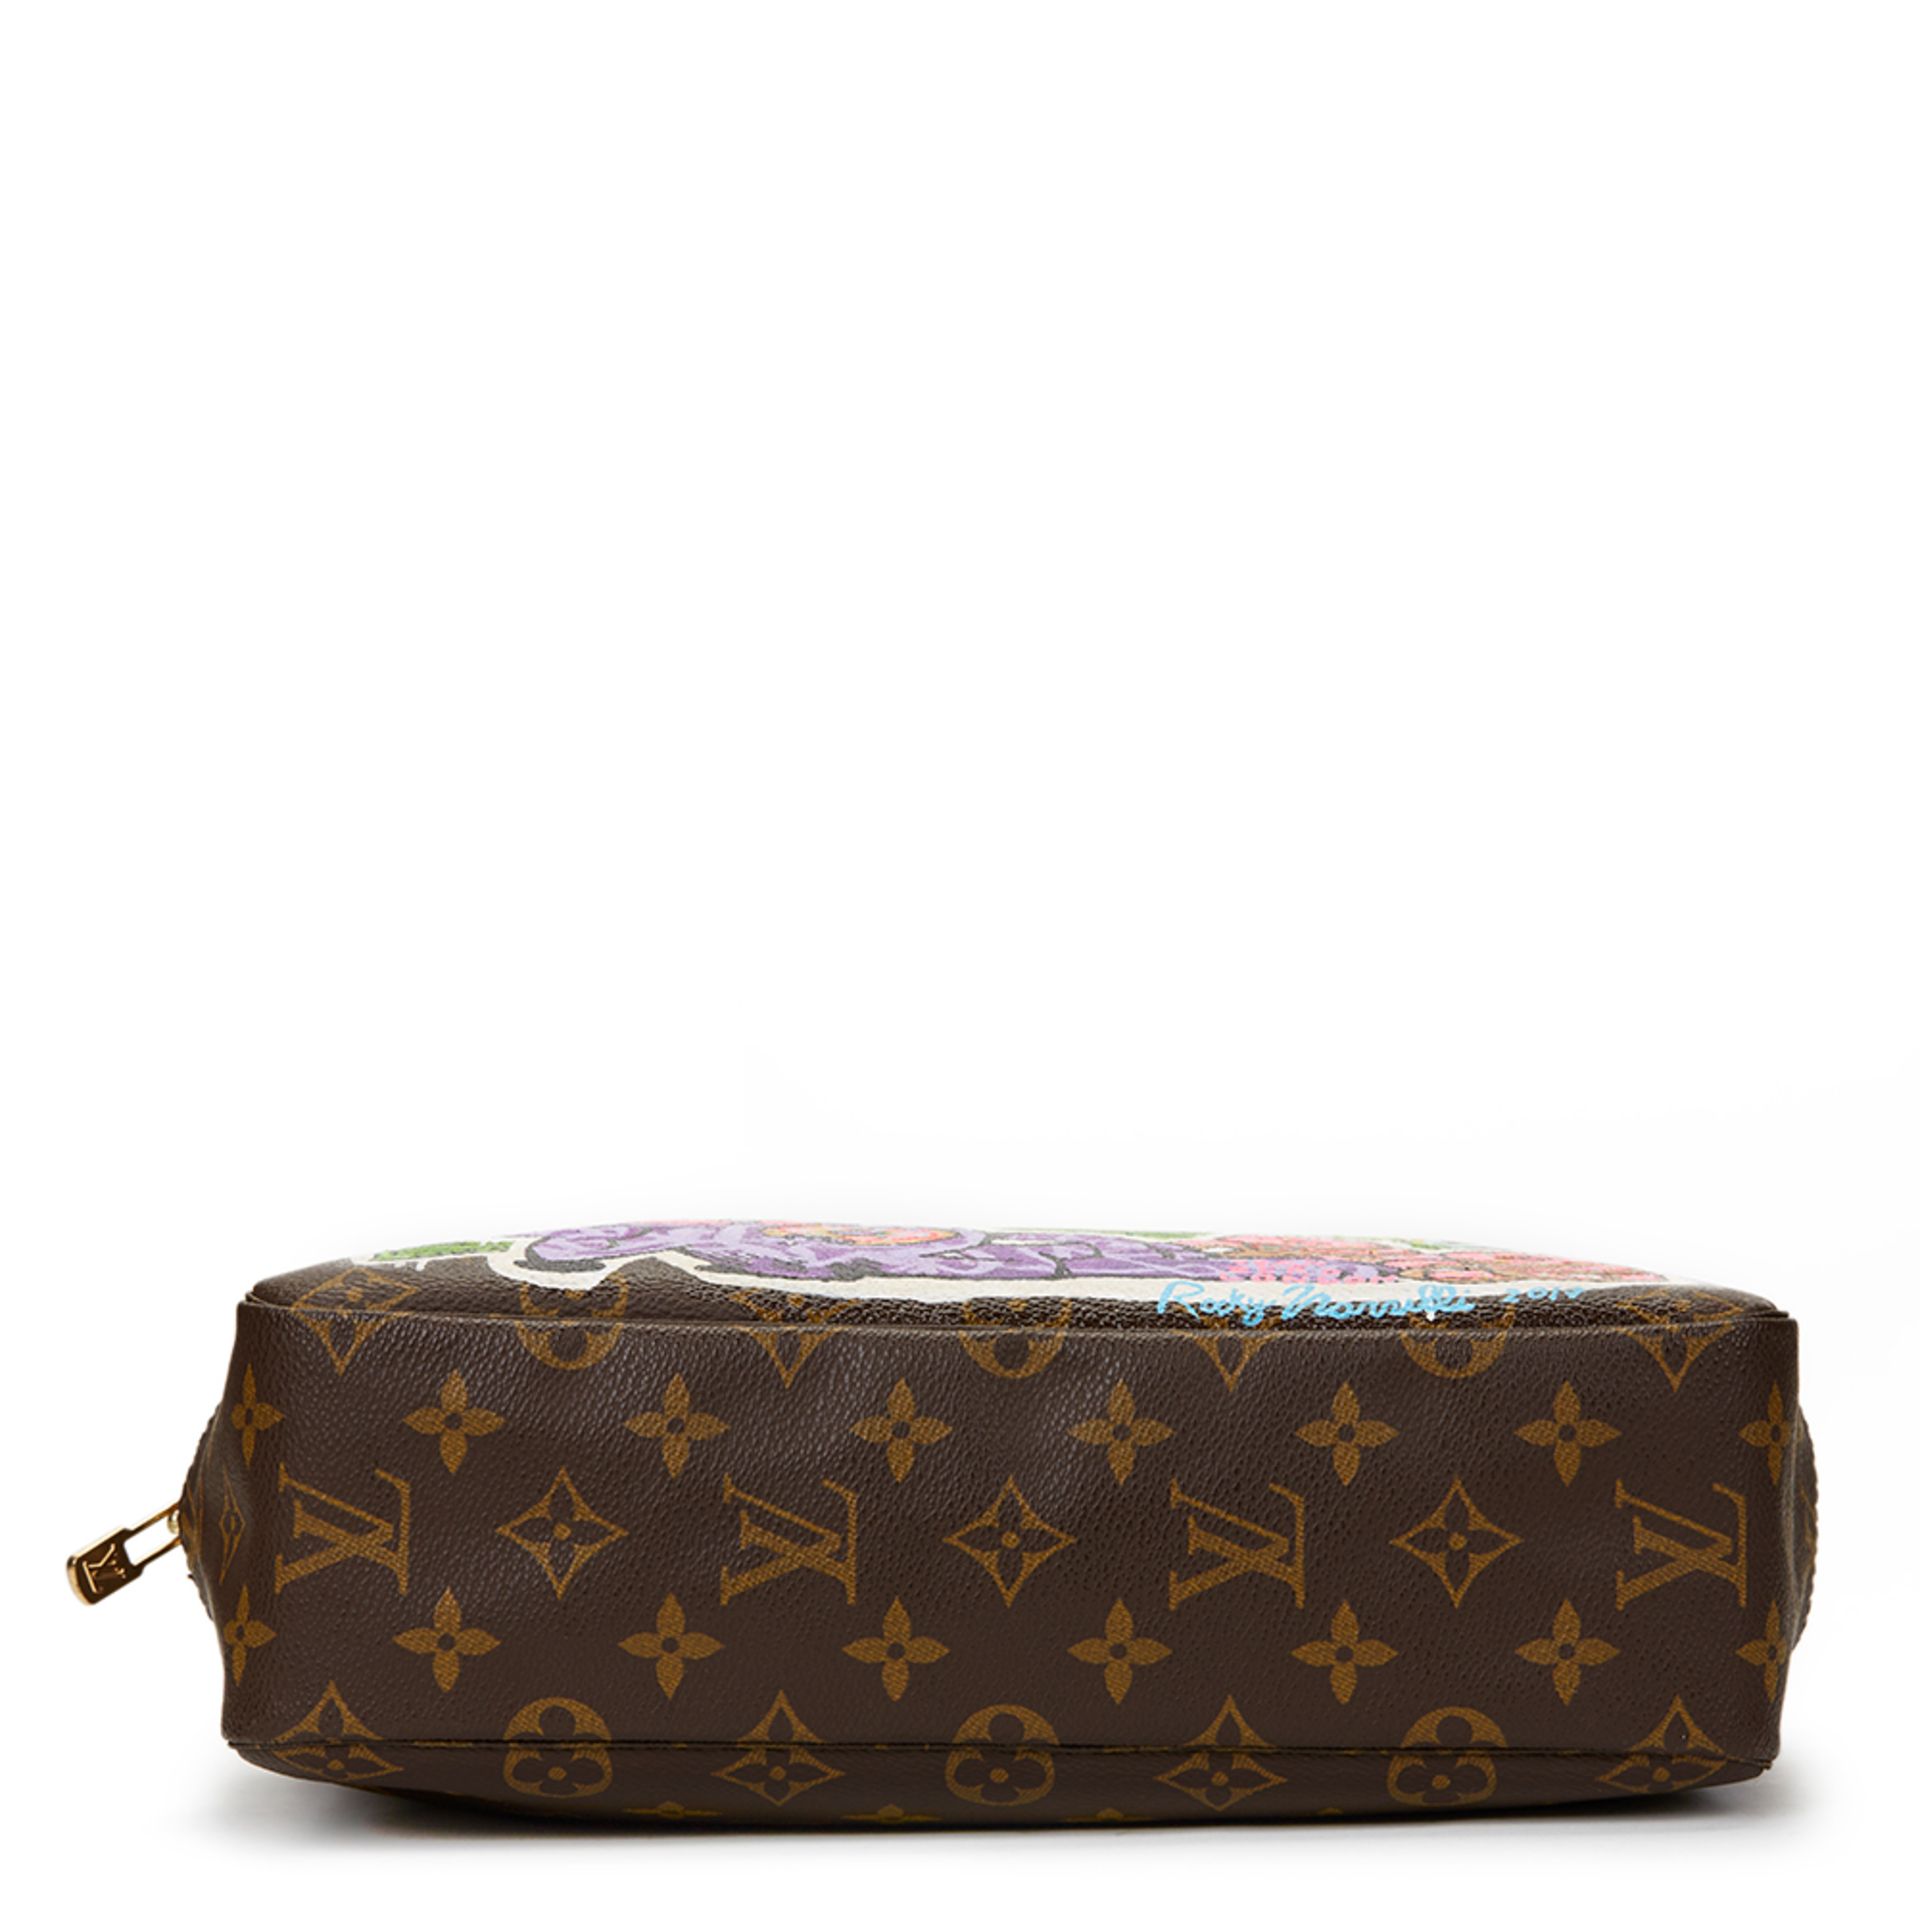 HB1180 Louis Vuitton Hand-painted 'Ca$h Me Outside' X Year Zero London Toiletry Pouch - Image 5 of 9